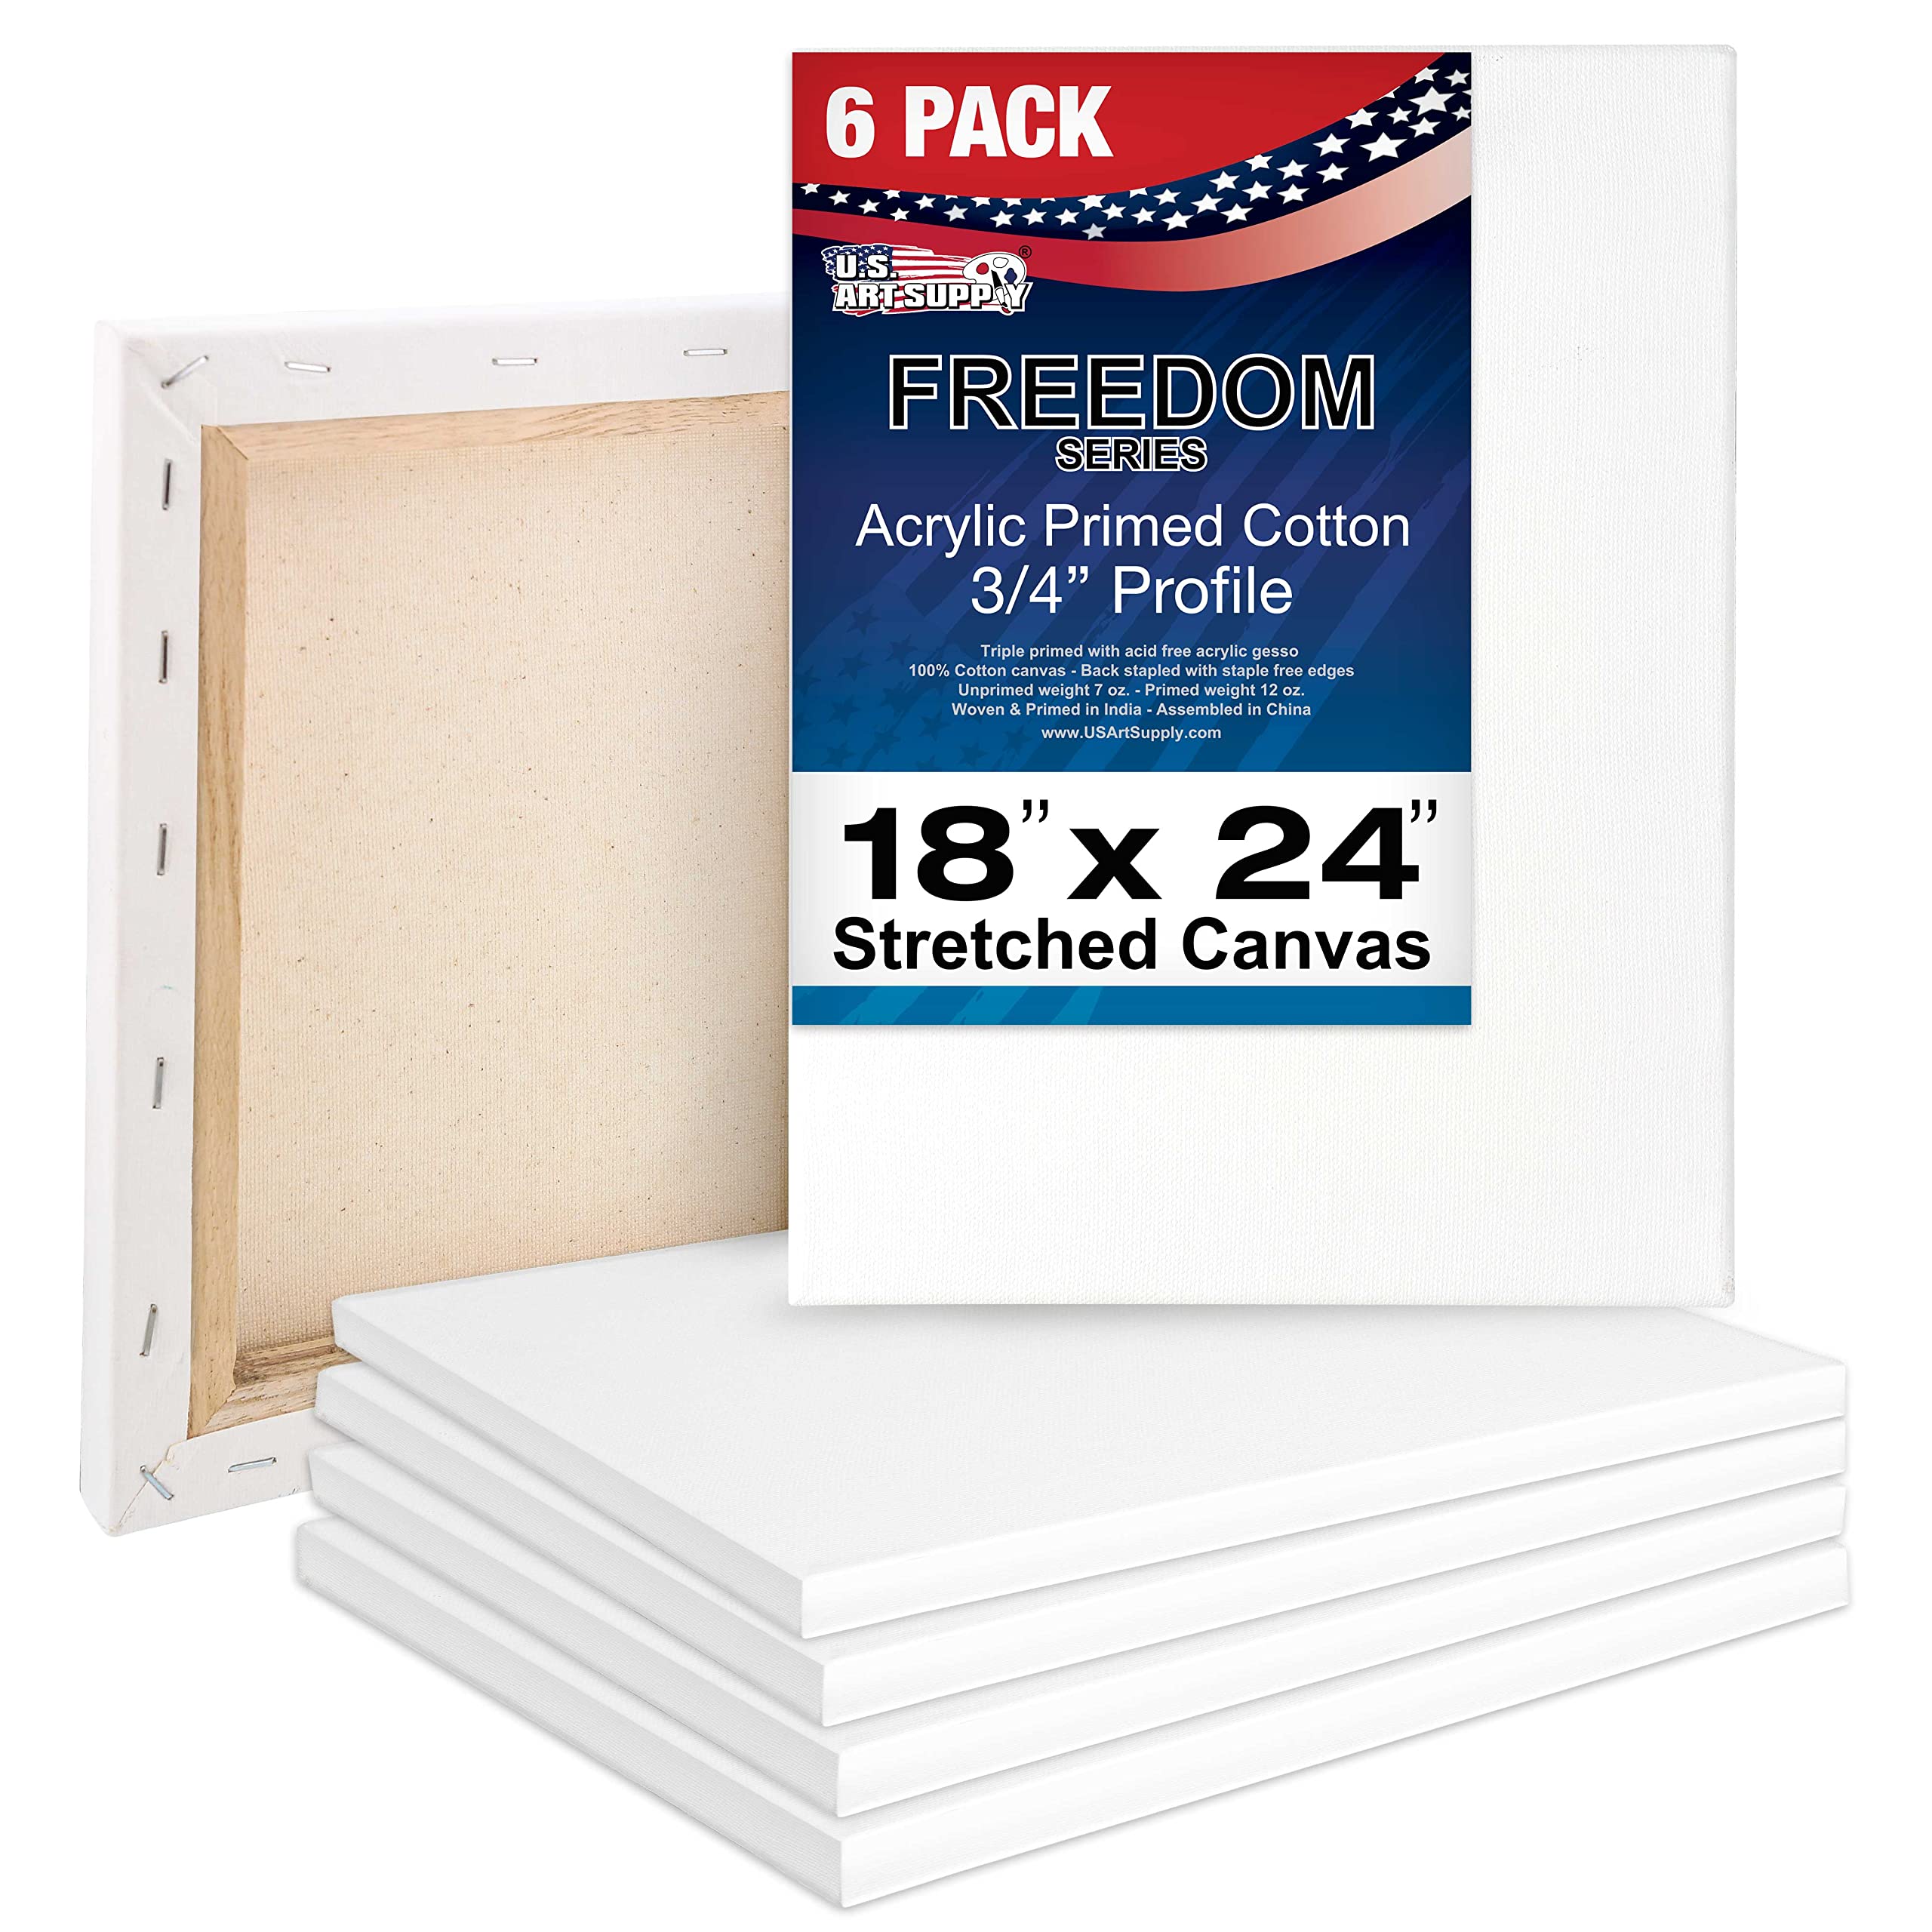 U.S. Art Supply 18 x 24 inch Stretched Canvas 12-Ounce Primed 6-Pack - Professional White Blank 3/4" Profile Heavy-Weight Gesso Acid Free Bulk Pack - Painting, Acrylic Pouring, Oil Paint